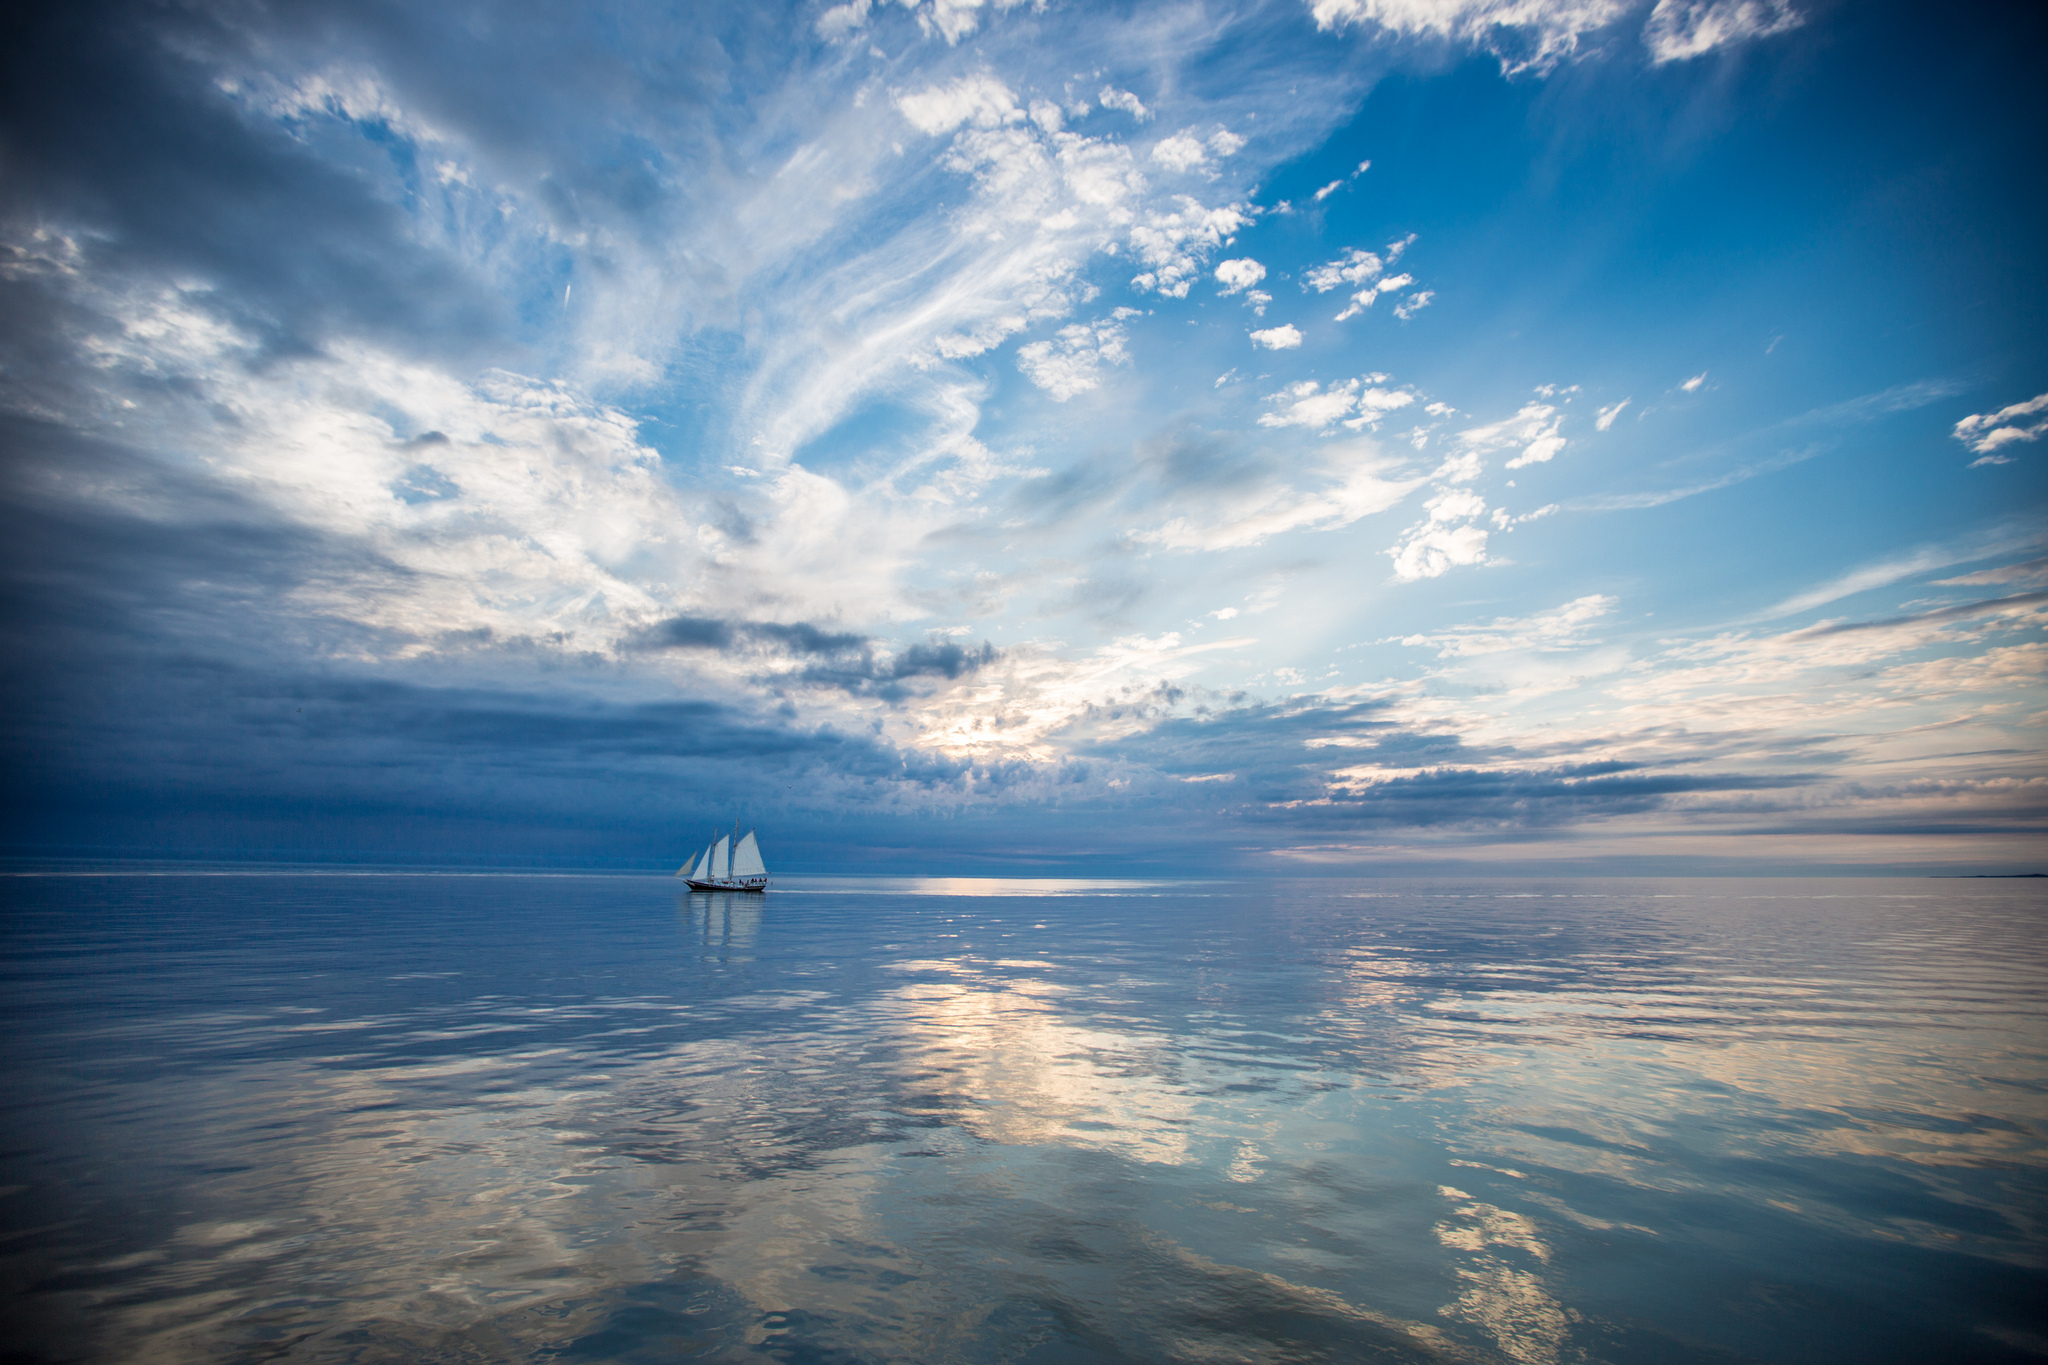 Sailing ship on the calm water / 2048 x 1365 / Water / Photography ...